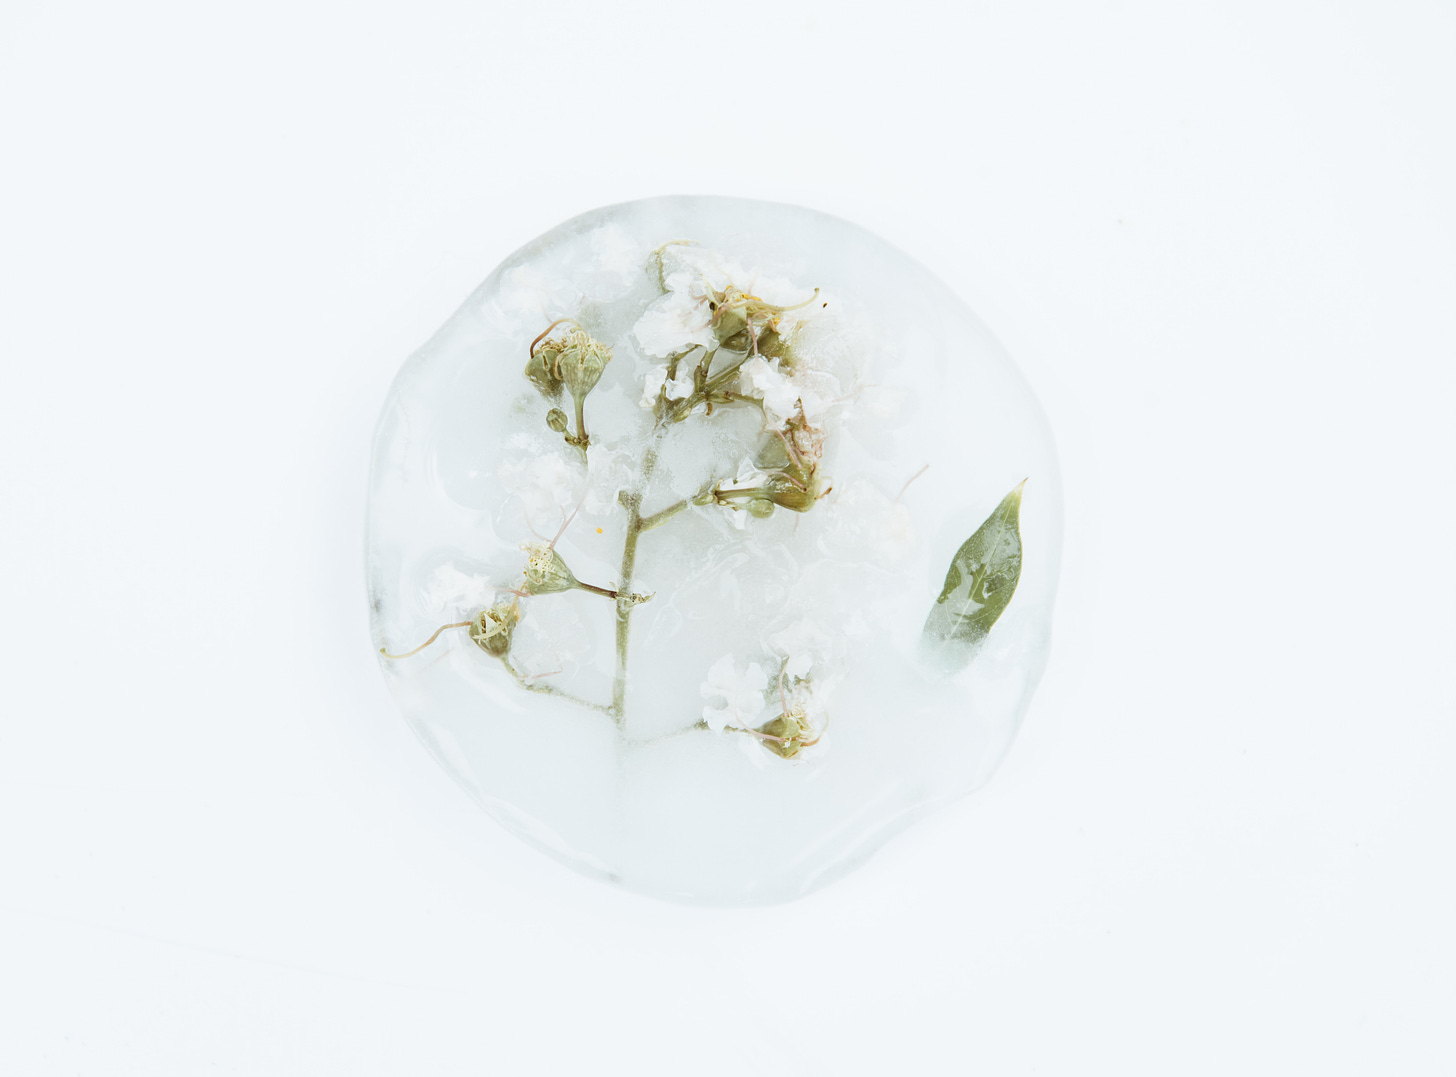 minimalist white photo of a round piece of ice with flowers frozen inside